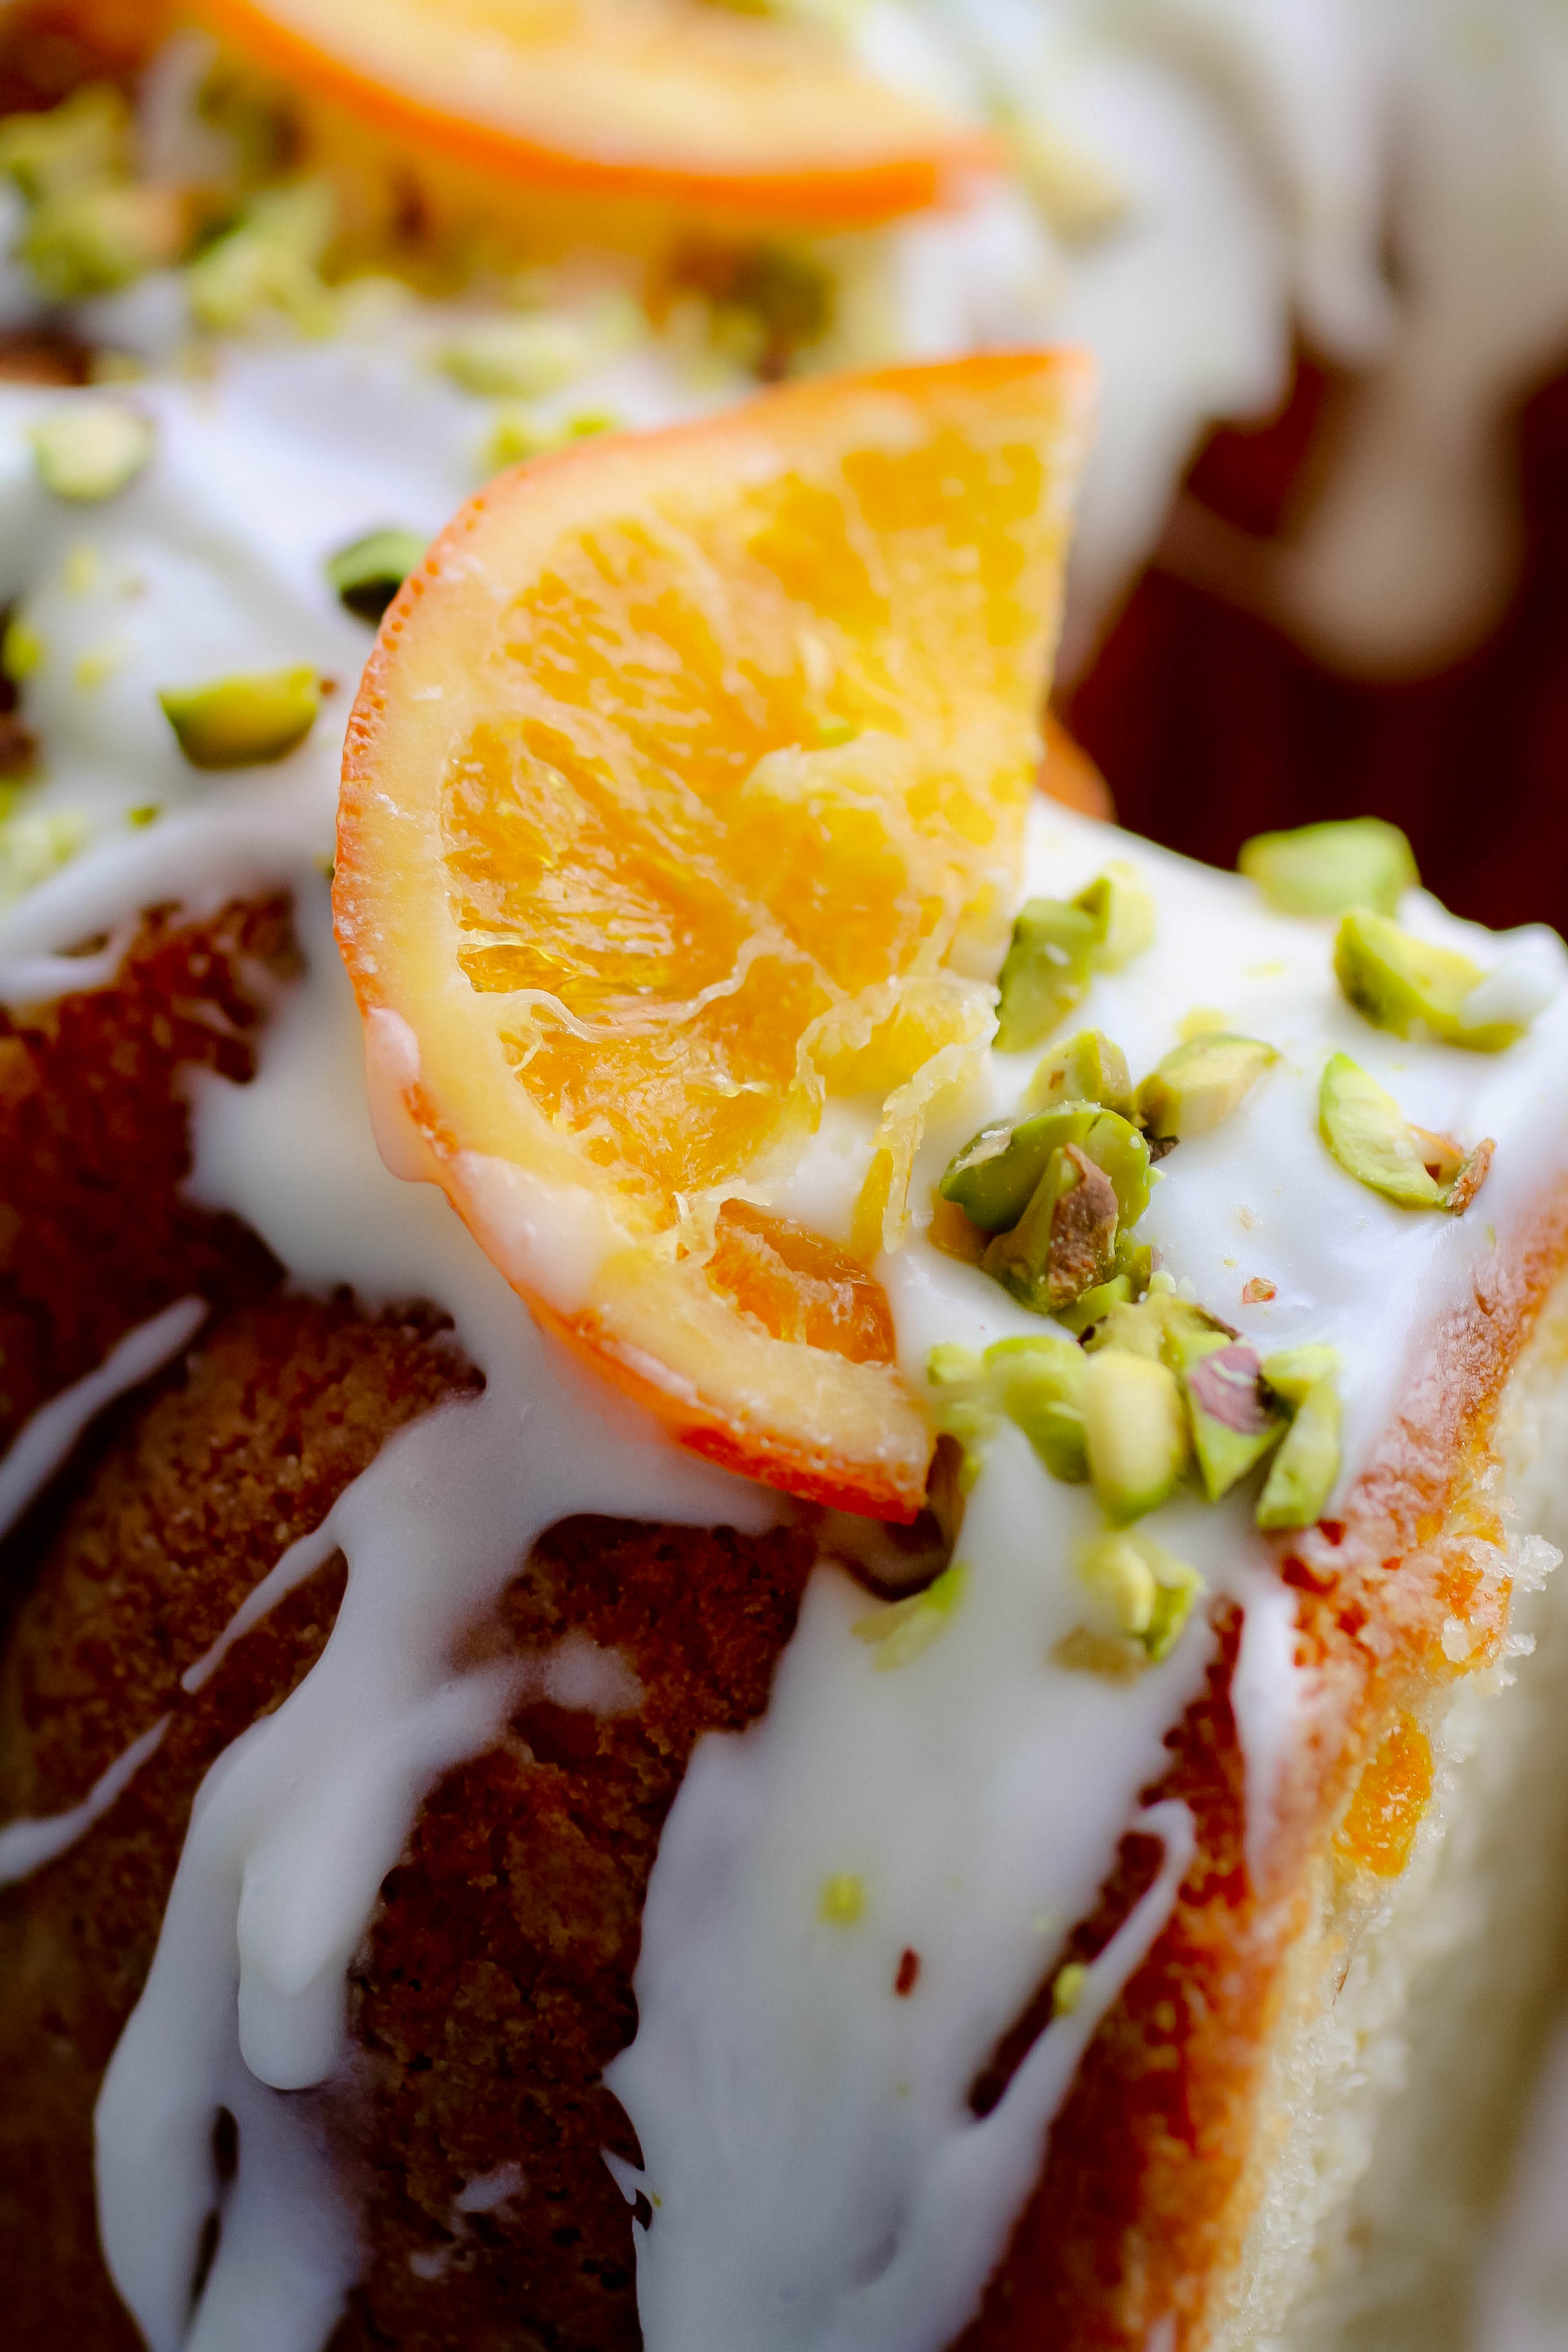 Orange Marmalade-Pistachio Bundt Cake is so pretty, and perfect for any spring holiday or occasion. You'll adore this festive Orange Marmalade-Pistachio Bundt Cake.